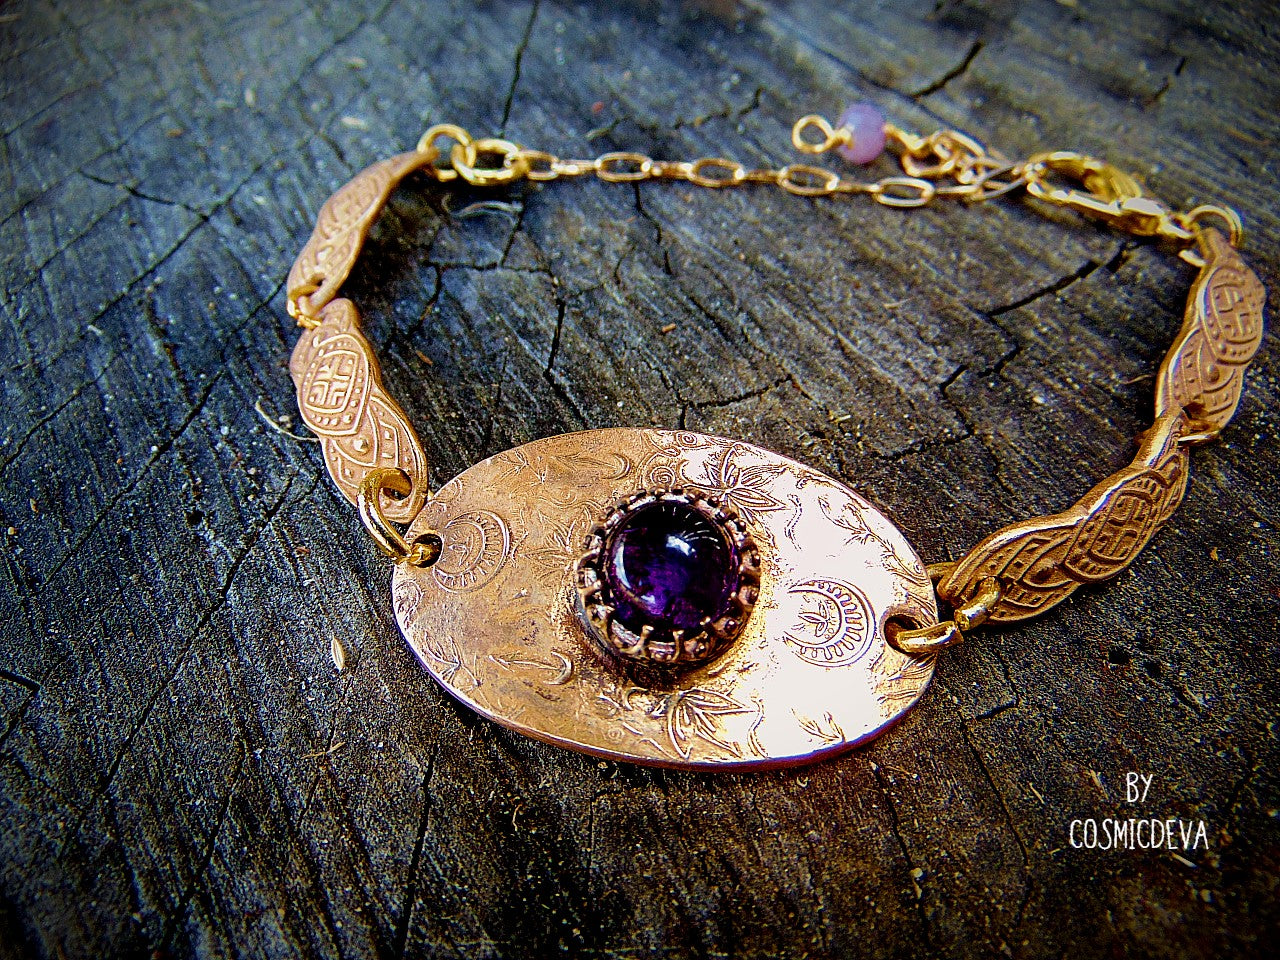 This one-of-a-kind piece is formed with love and care, reflecting a unique filigree design reminiscent of elven artistry. The artisan bracelet is adorned with natural amethyst, a gemstone known for its stunning purple hue and calming properties. The hand-formed chain links are meticulously designed with a medieval texture, adding an element of historical charm to the piece